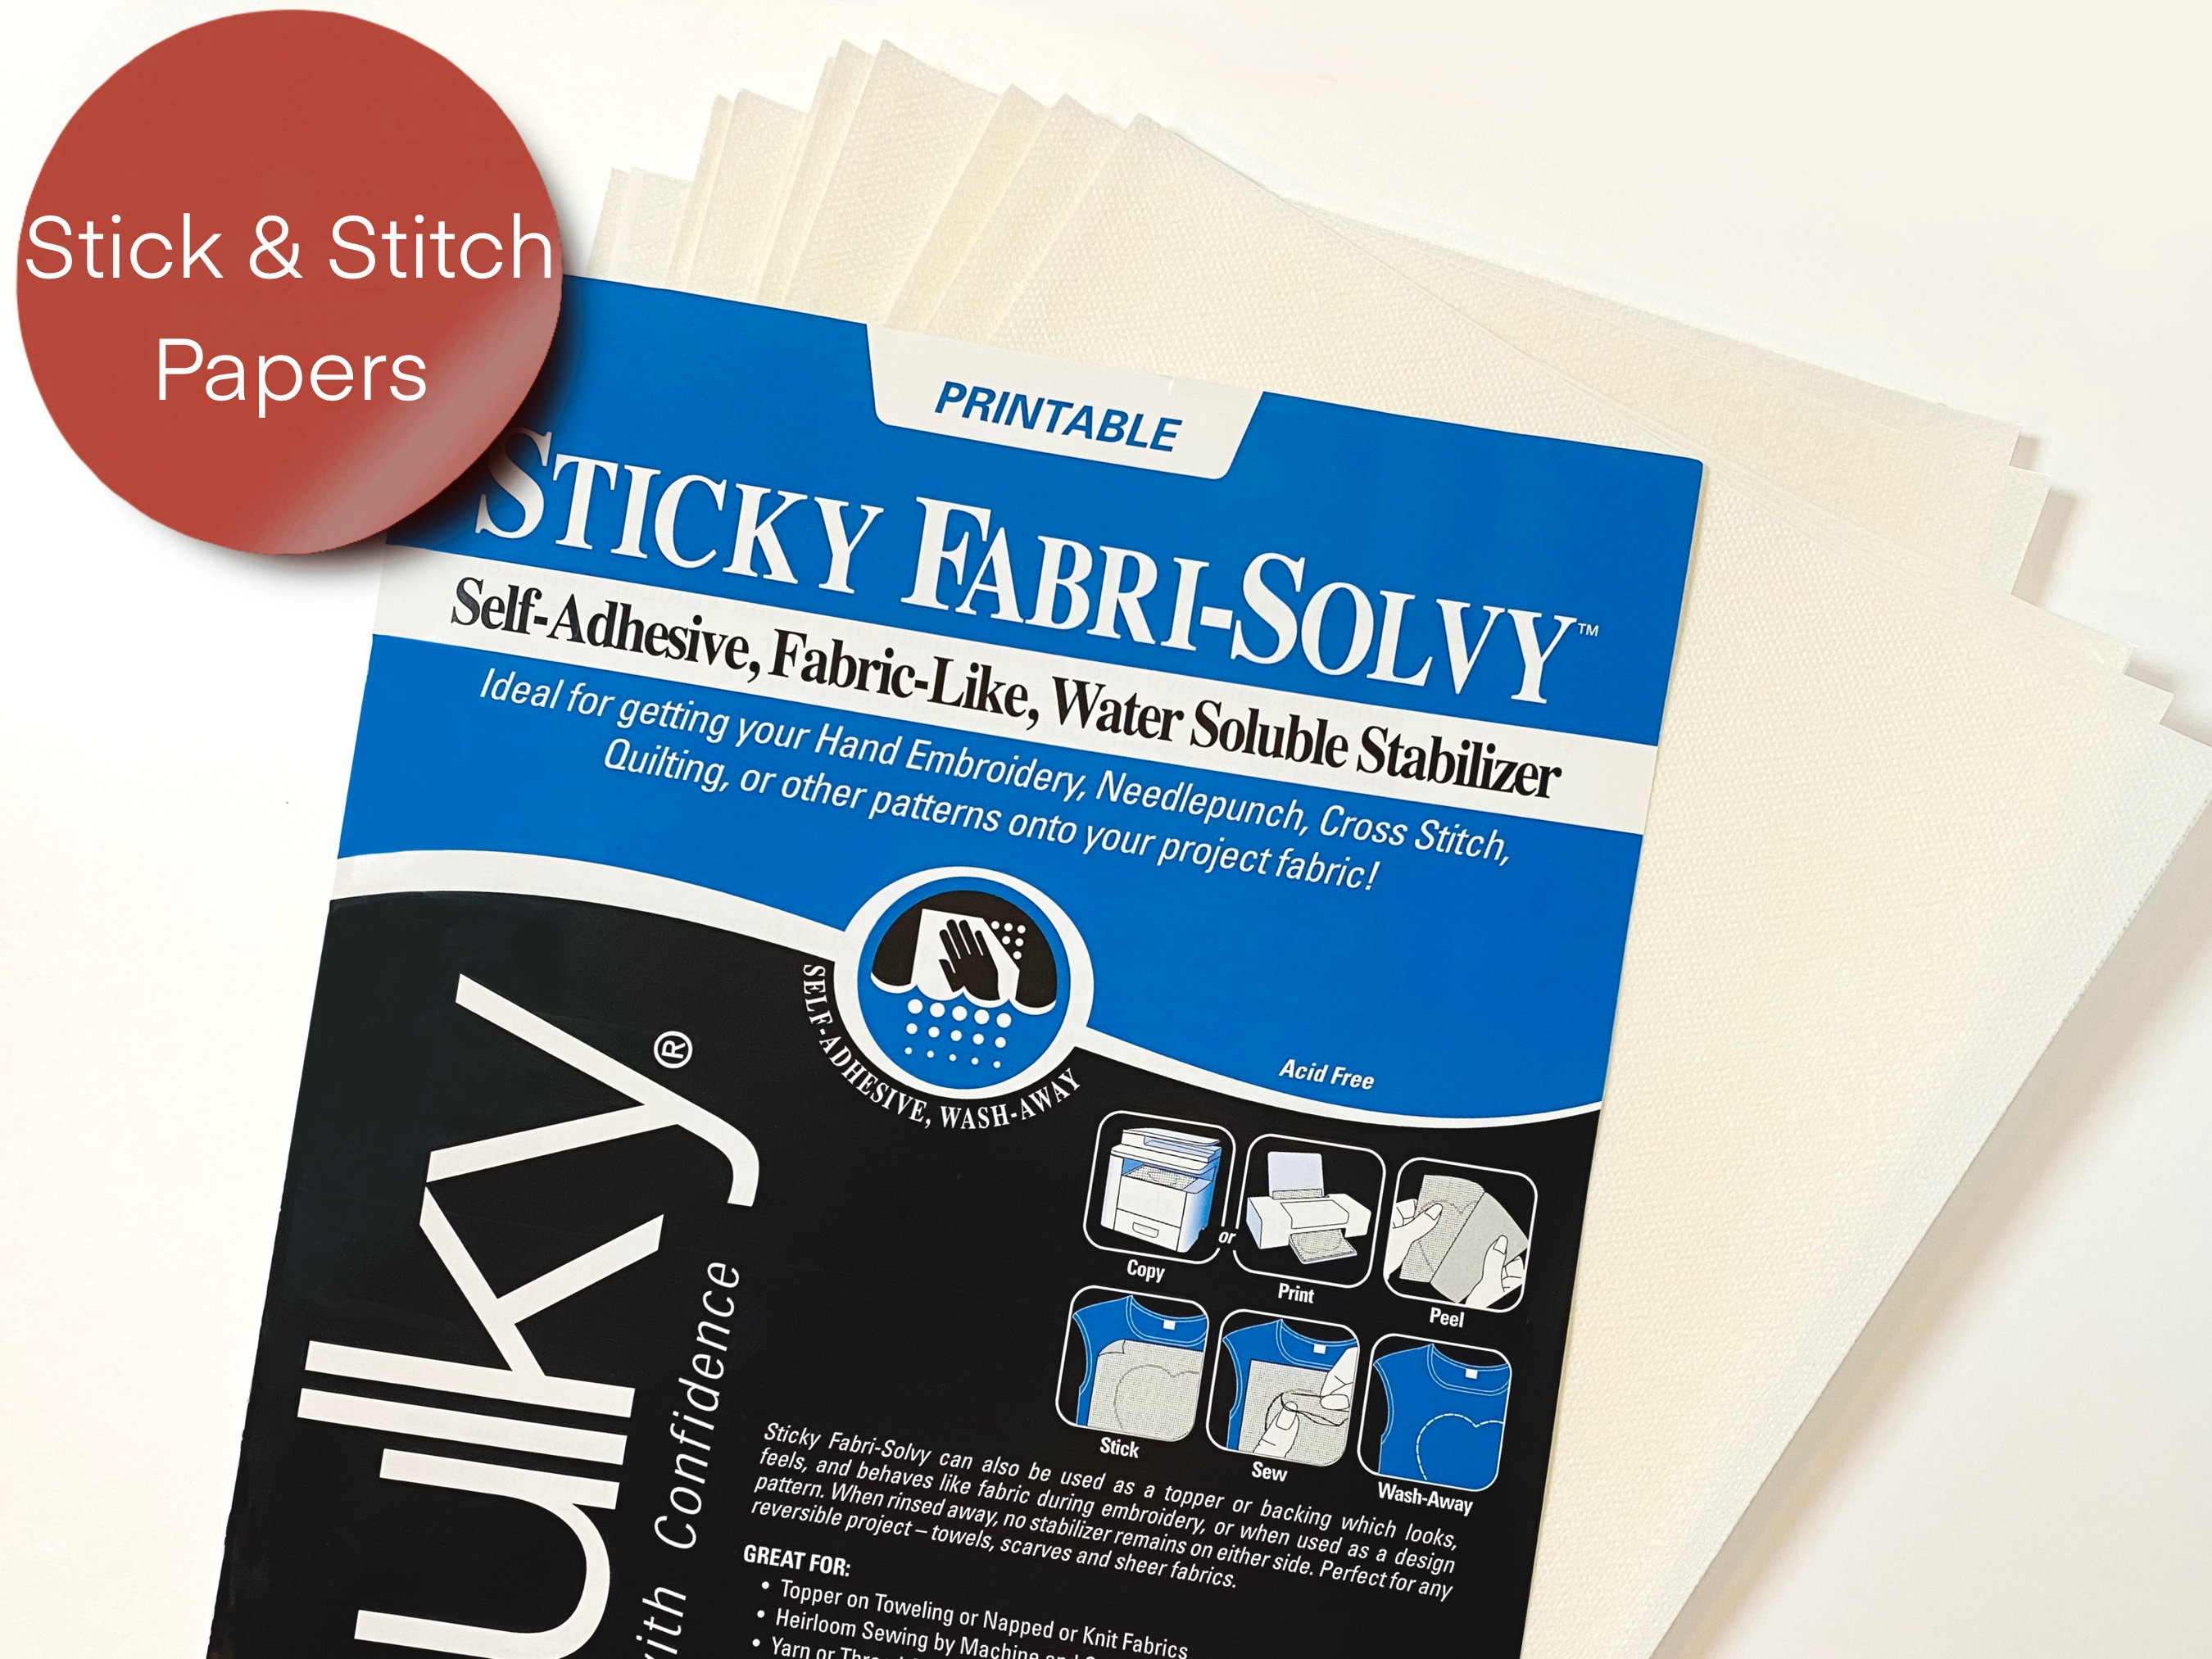 Sticky Fabri-Solvy | Adhesive Printable Sulky Temporary Water Soluble  Stabilizer for Embroidery, Quilting, Applique